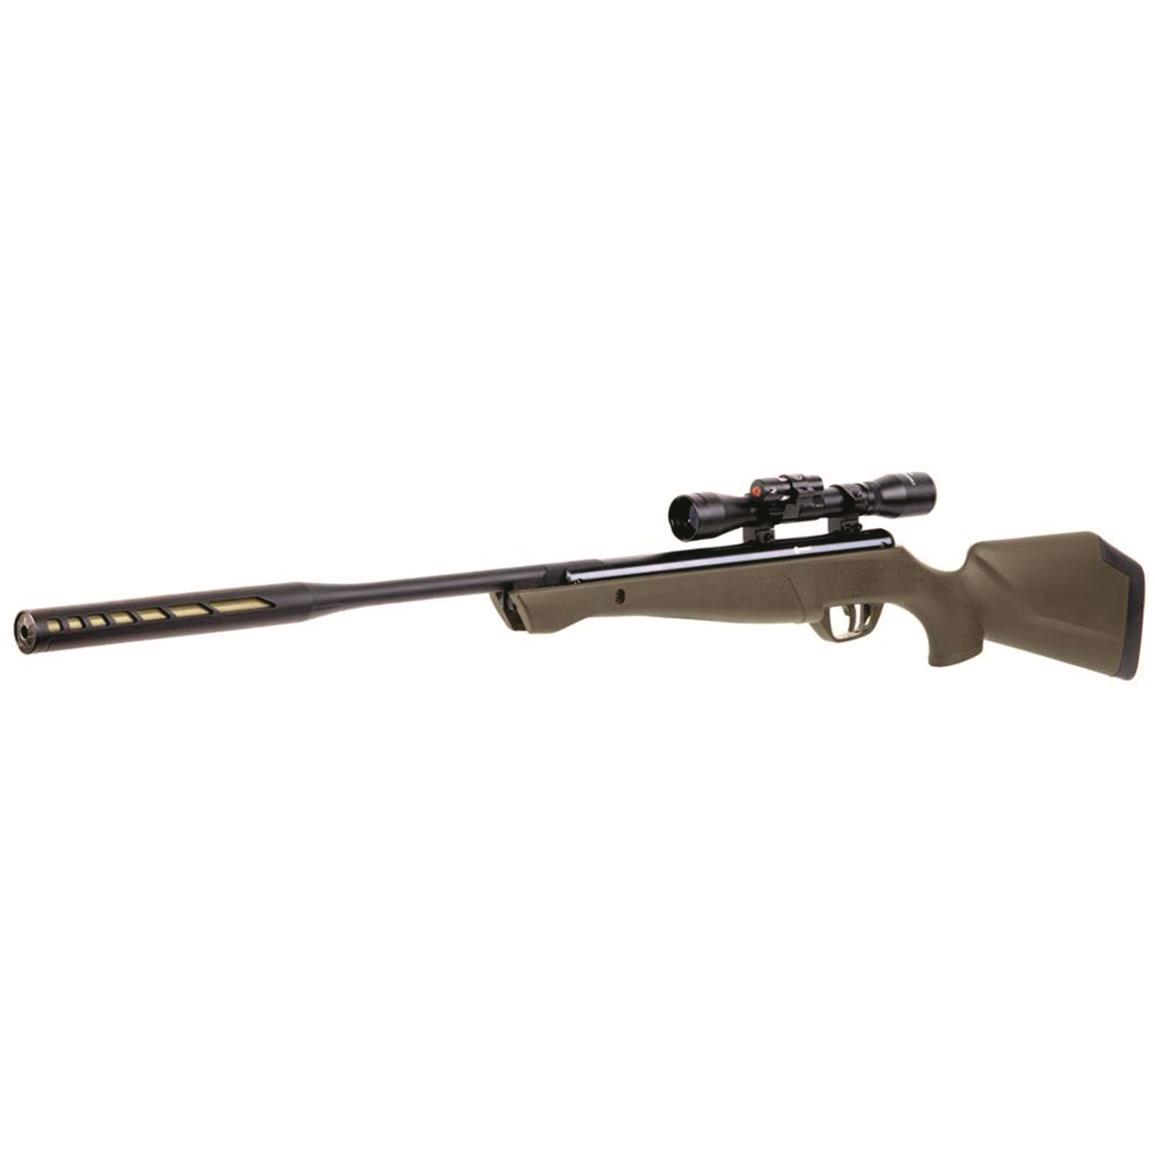 Air Rifle with 4x32mm Adjustable Scope ! Details about   Benjamin Prowler Nitro Piston .177 Cal 